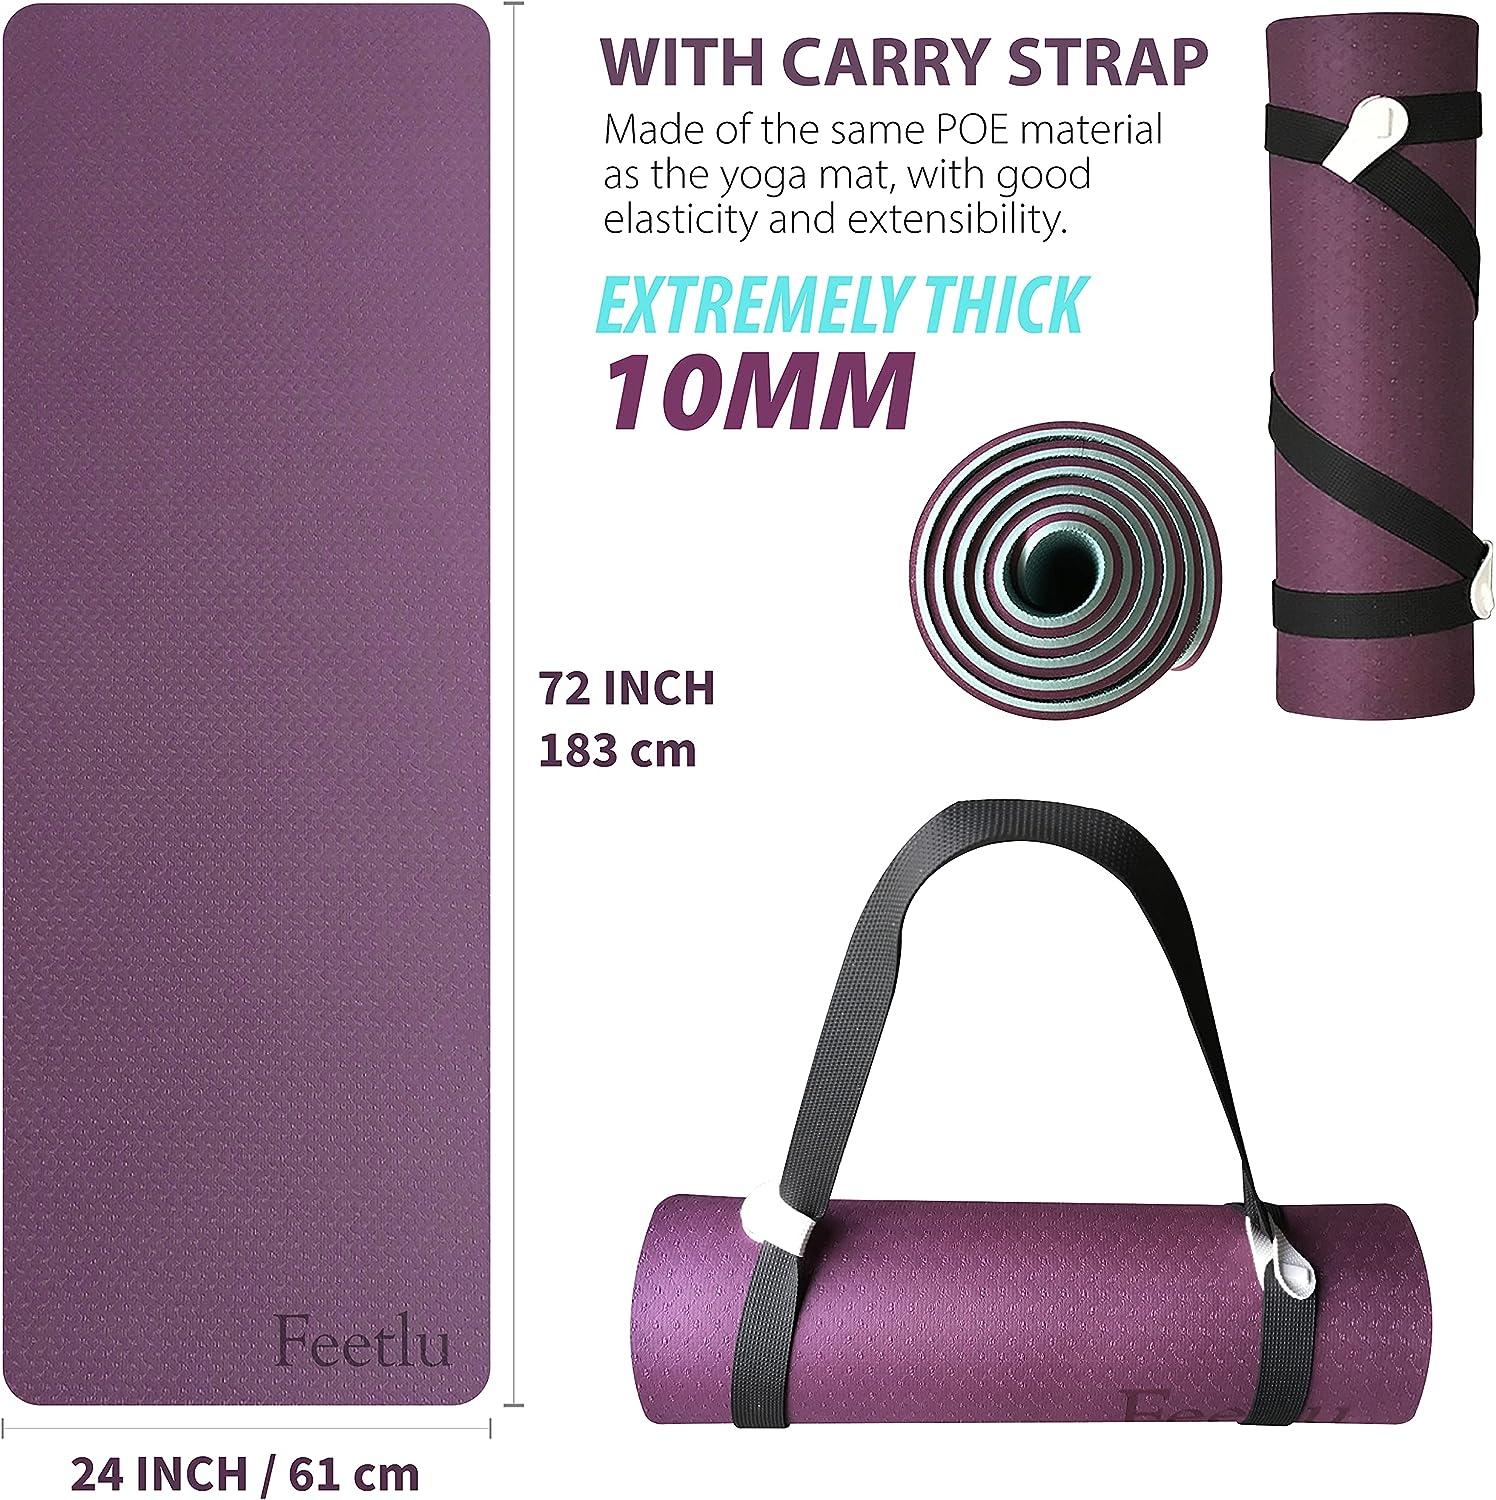 Buy Strauss Extra Thick Yoga Mat with Carrying Strap, 15 mm